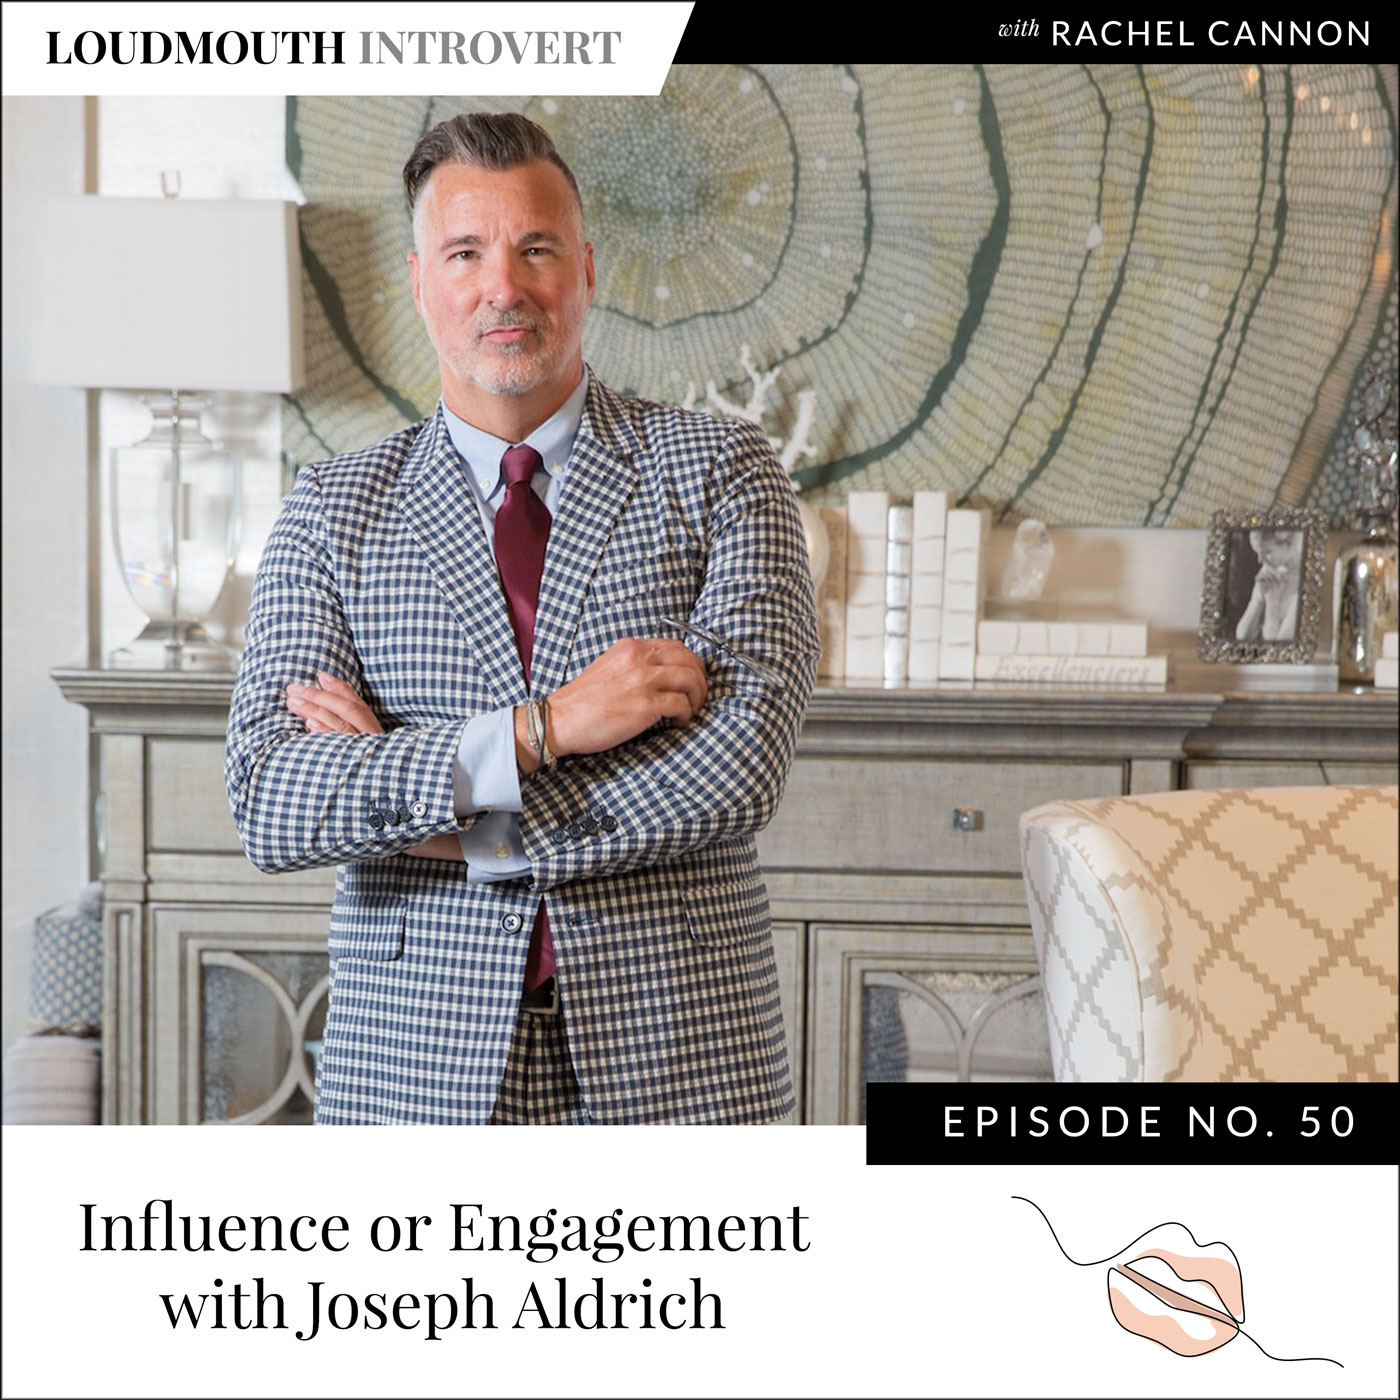 Influence or Engagement with Joseph Aldrich